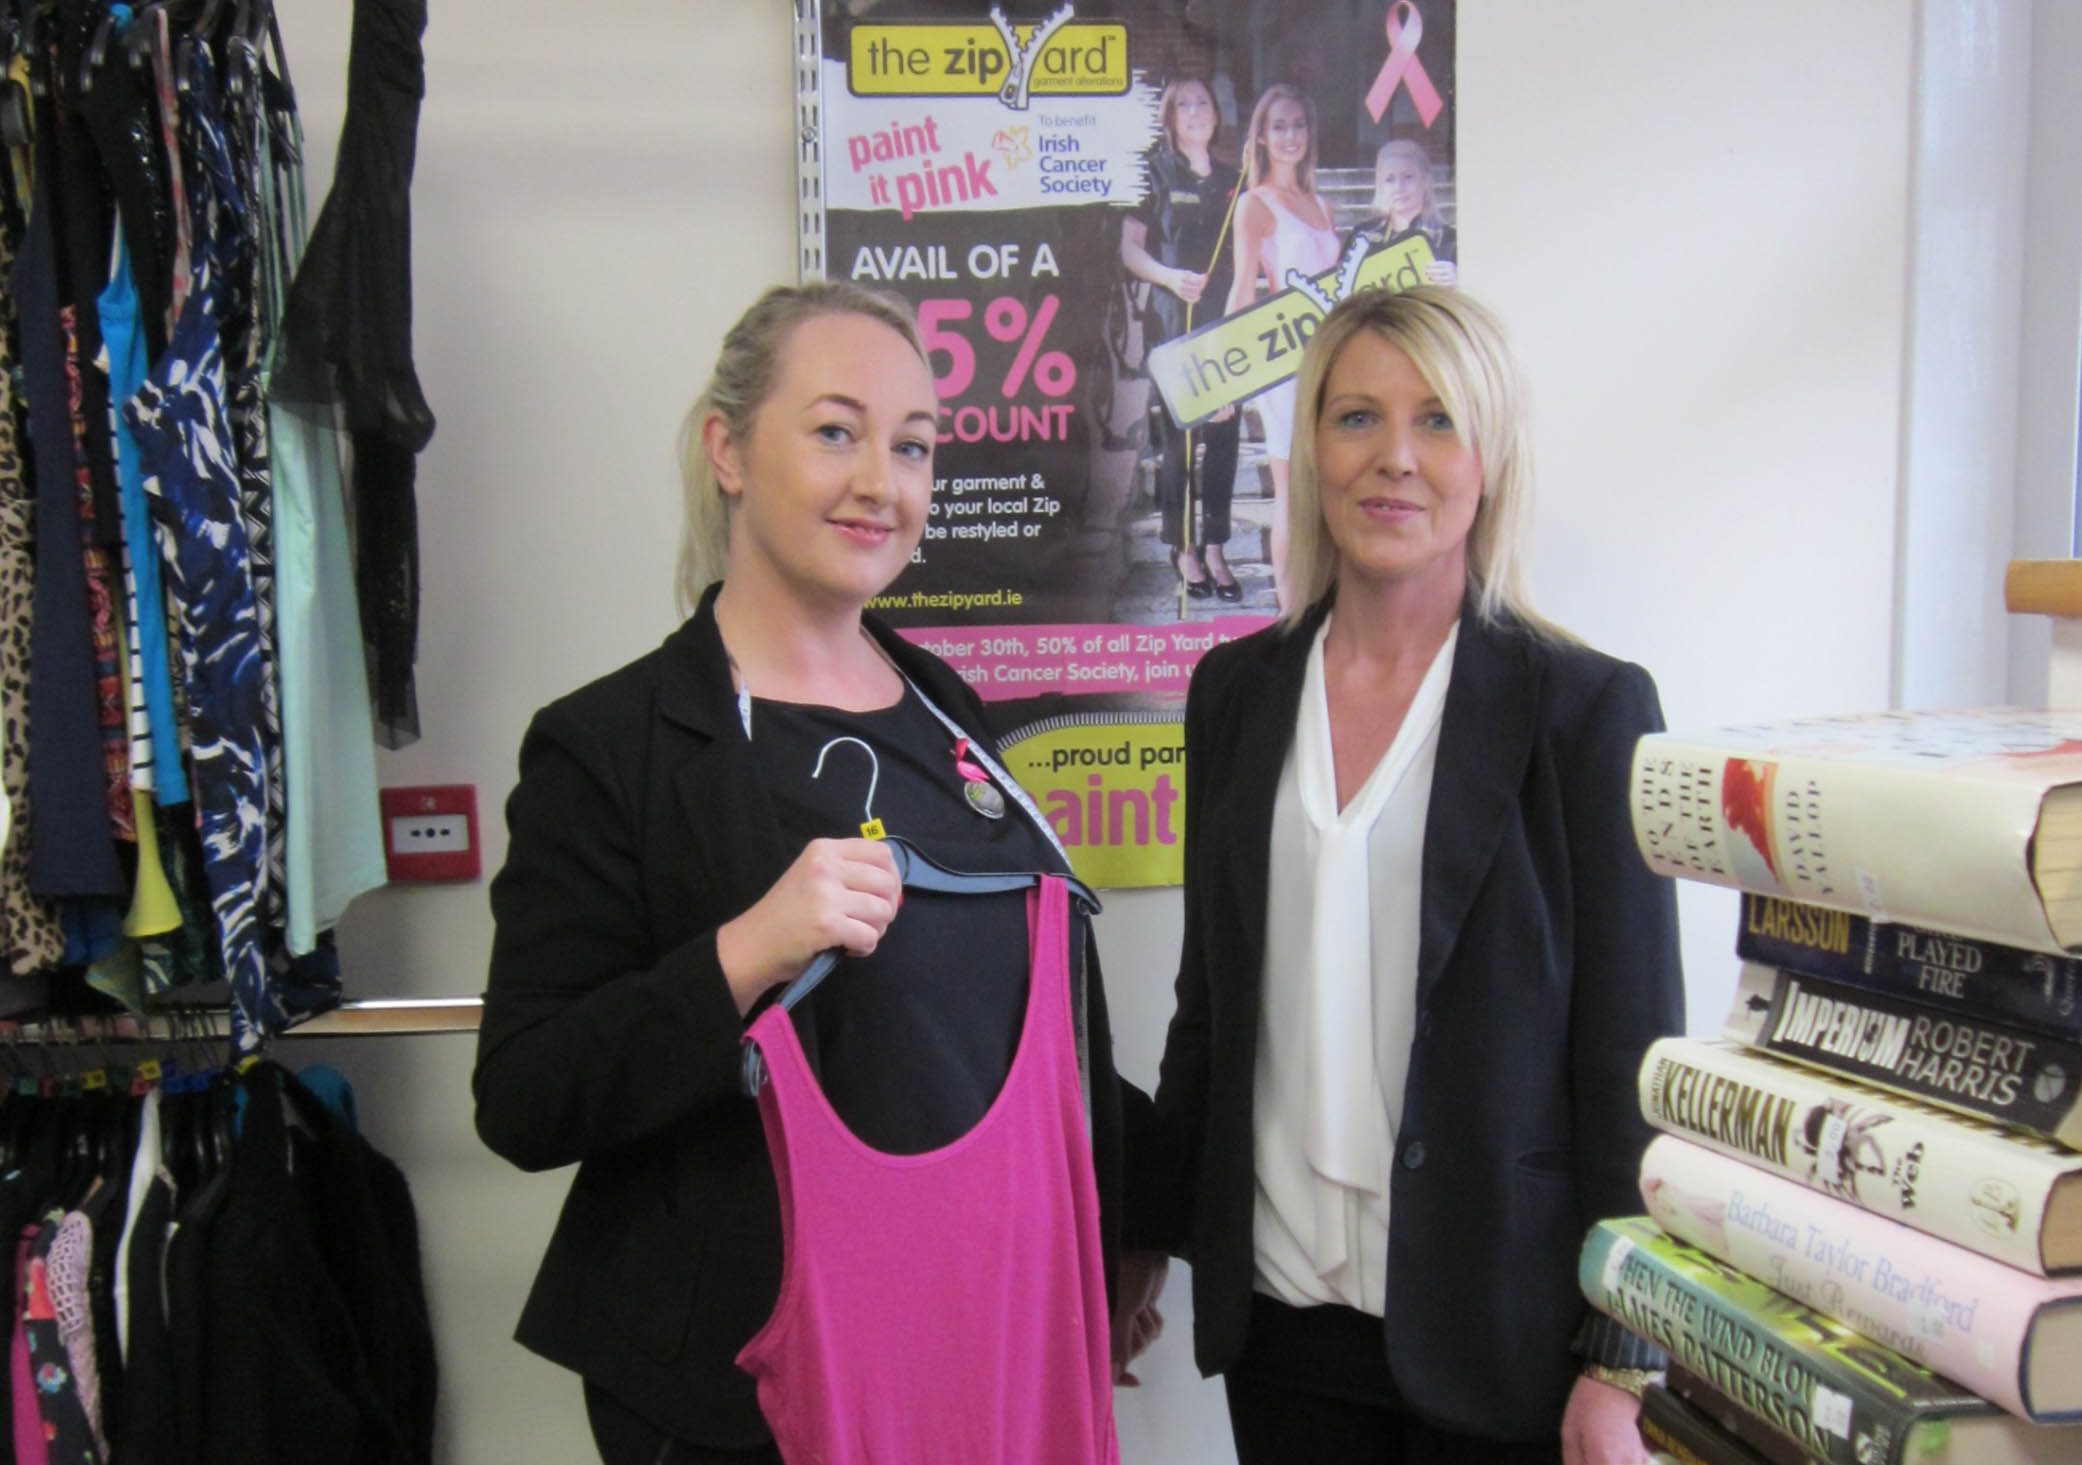 The Zip Yard supports the Irish Cancer Society Paint it Pink campaign